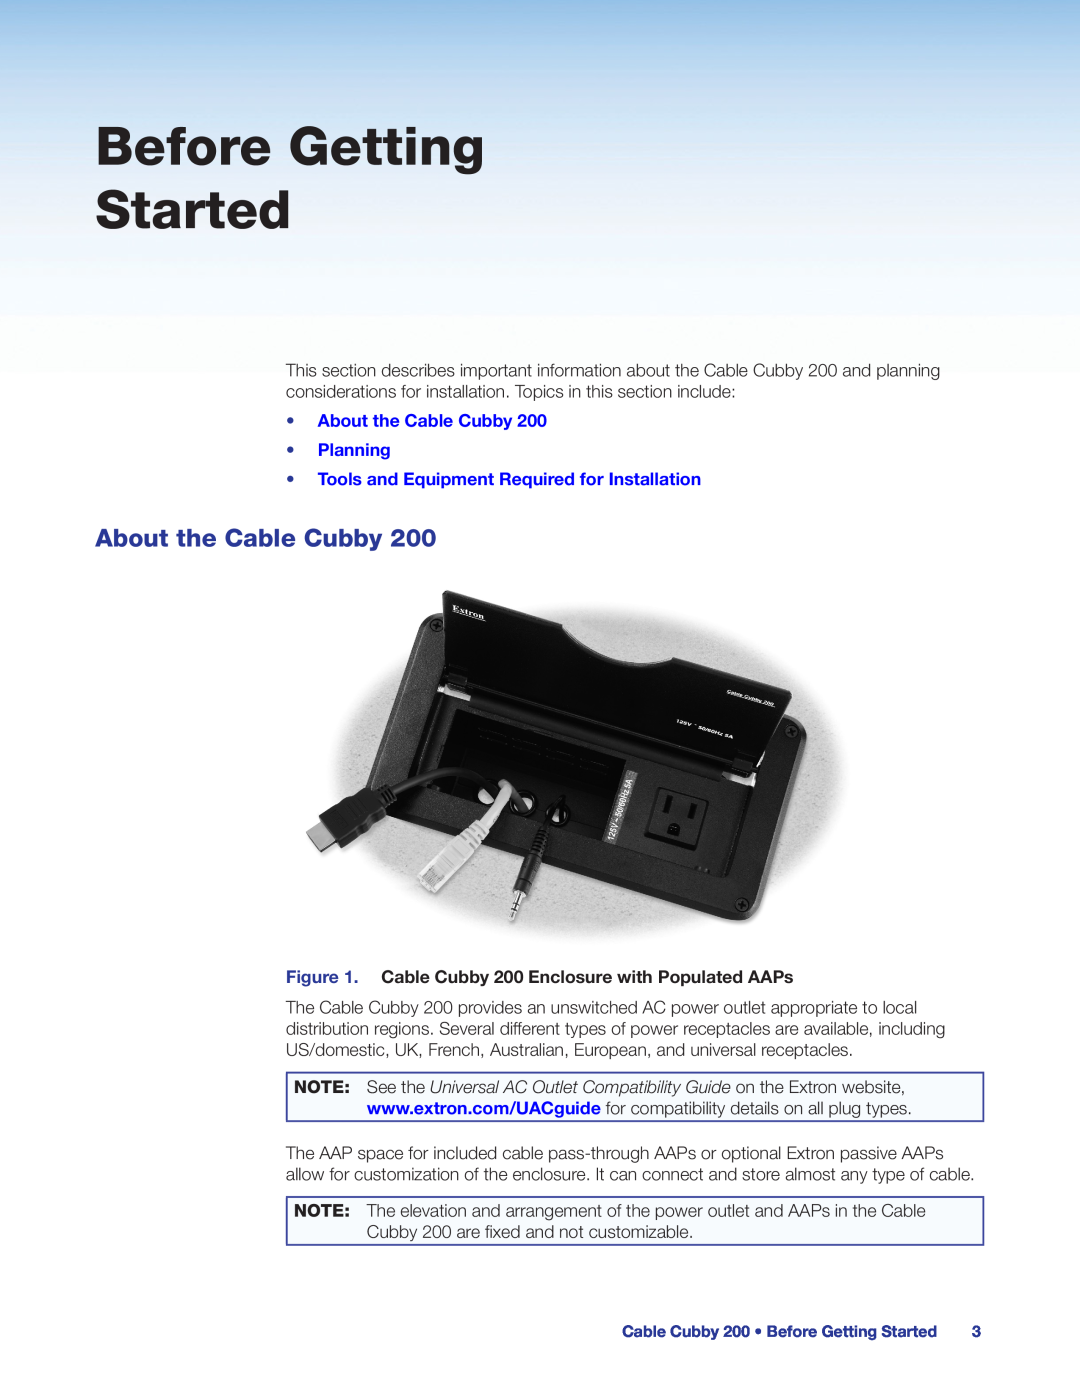 Extron electronic 200 manual Before Getting Started, About the Cable Cubby Planning 